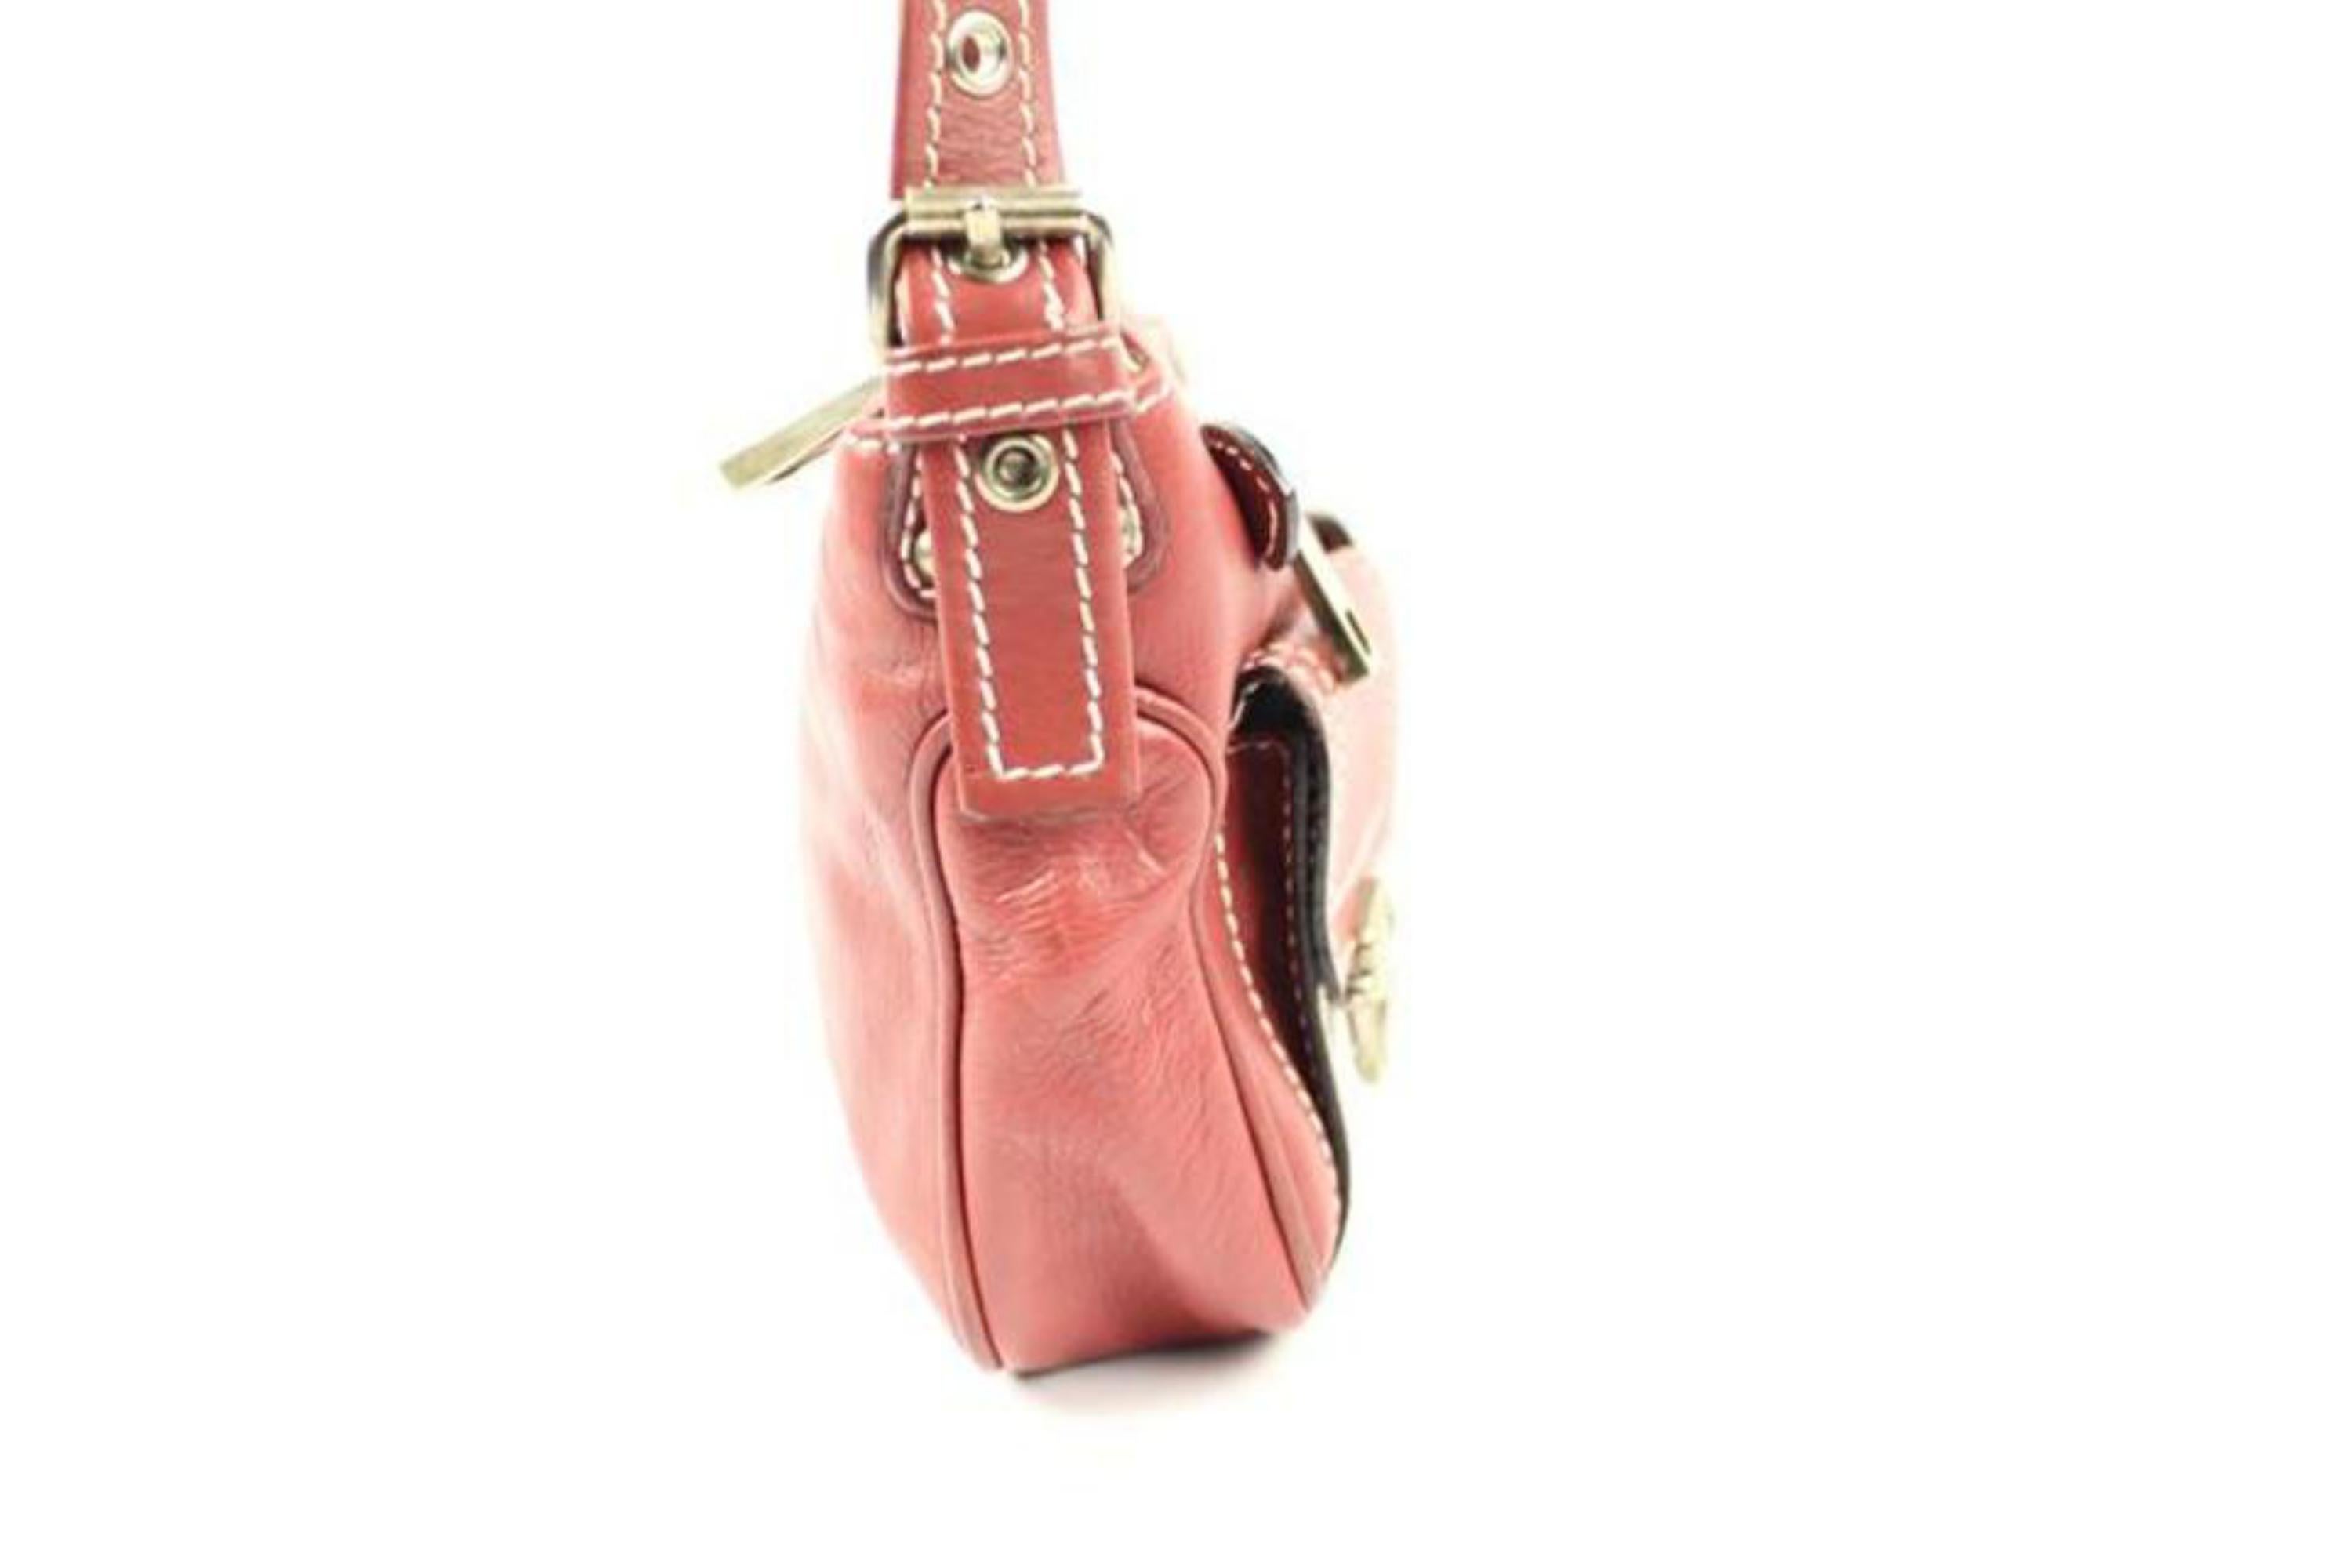 Marc Jacobs Mjbsl04 Red Leather Hobo Bag For Sale 4